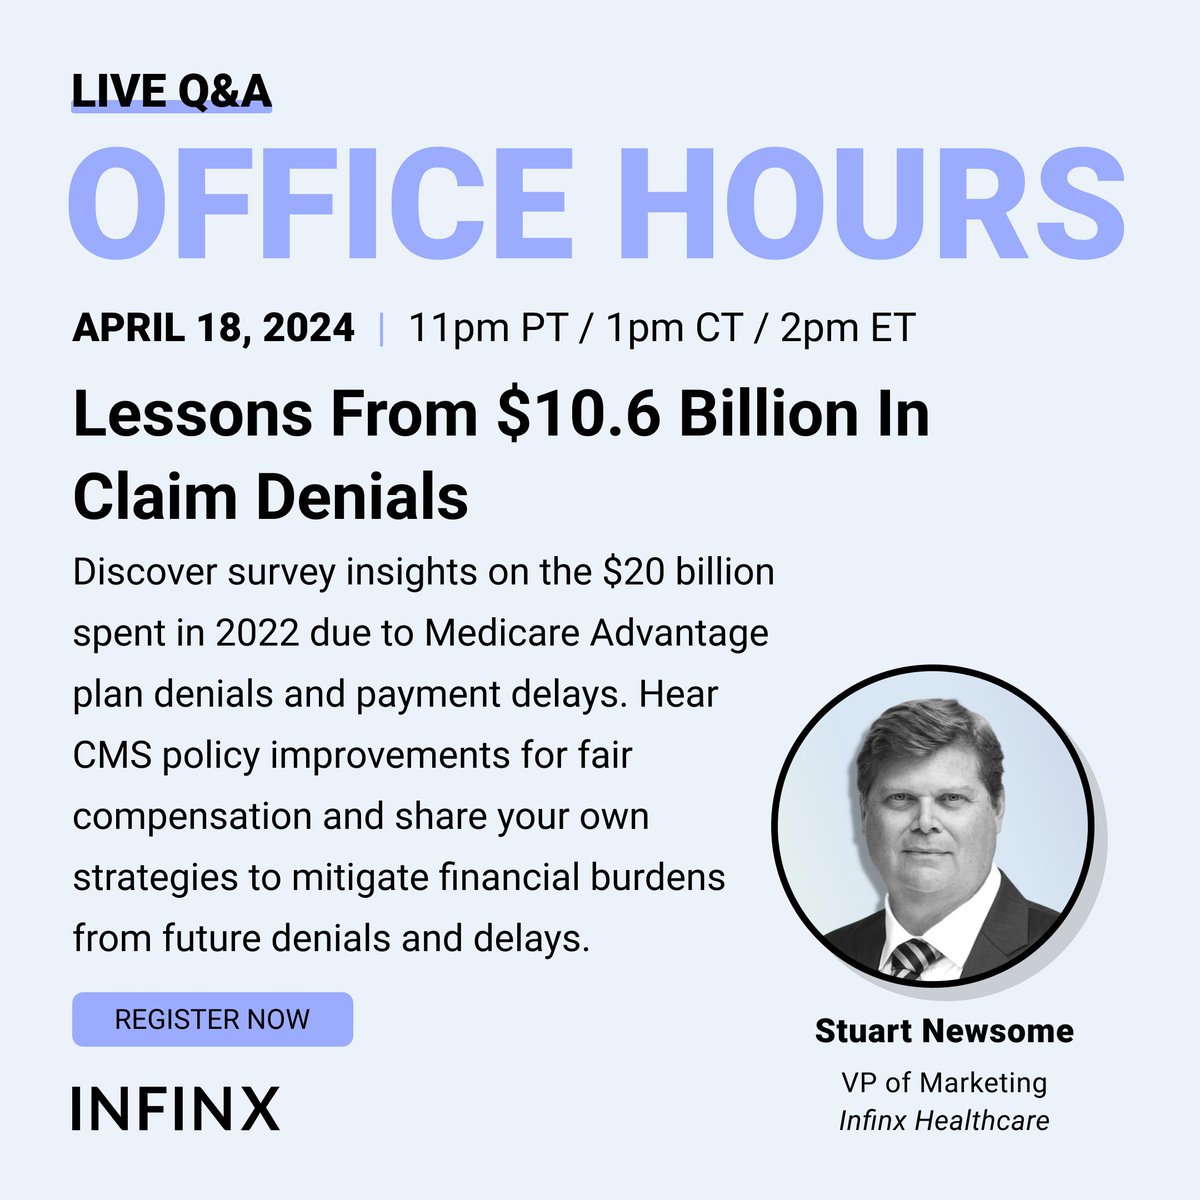 Feeling the costs from claims denials? In this week’s Office Hours, we’re diving into Premier’s survey of 516 hospitals, who spent $20 billion in 2022 alone on claims denials and delays. hubs.li/Q02t4Bhk0 #HealthcareTech #DenialsManagement #AI #RCMAutomation